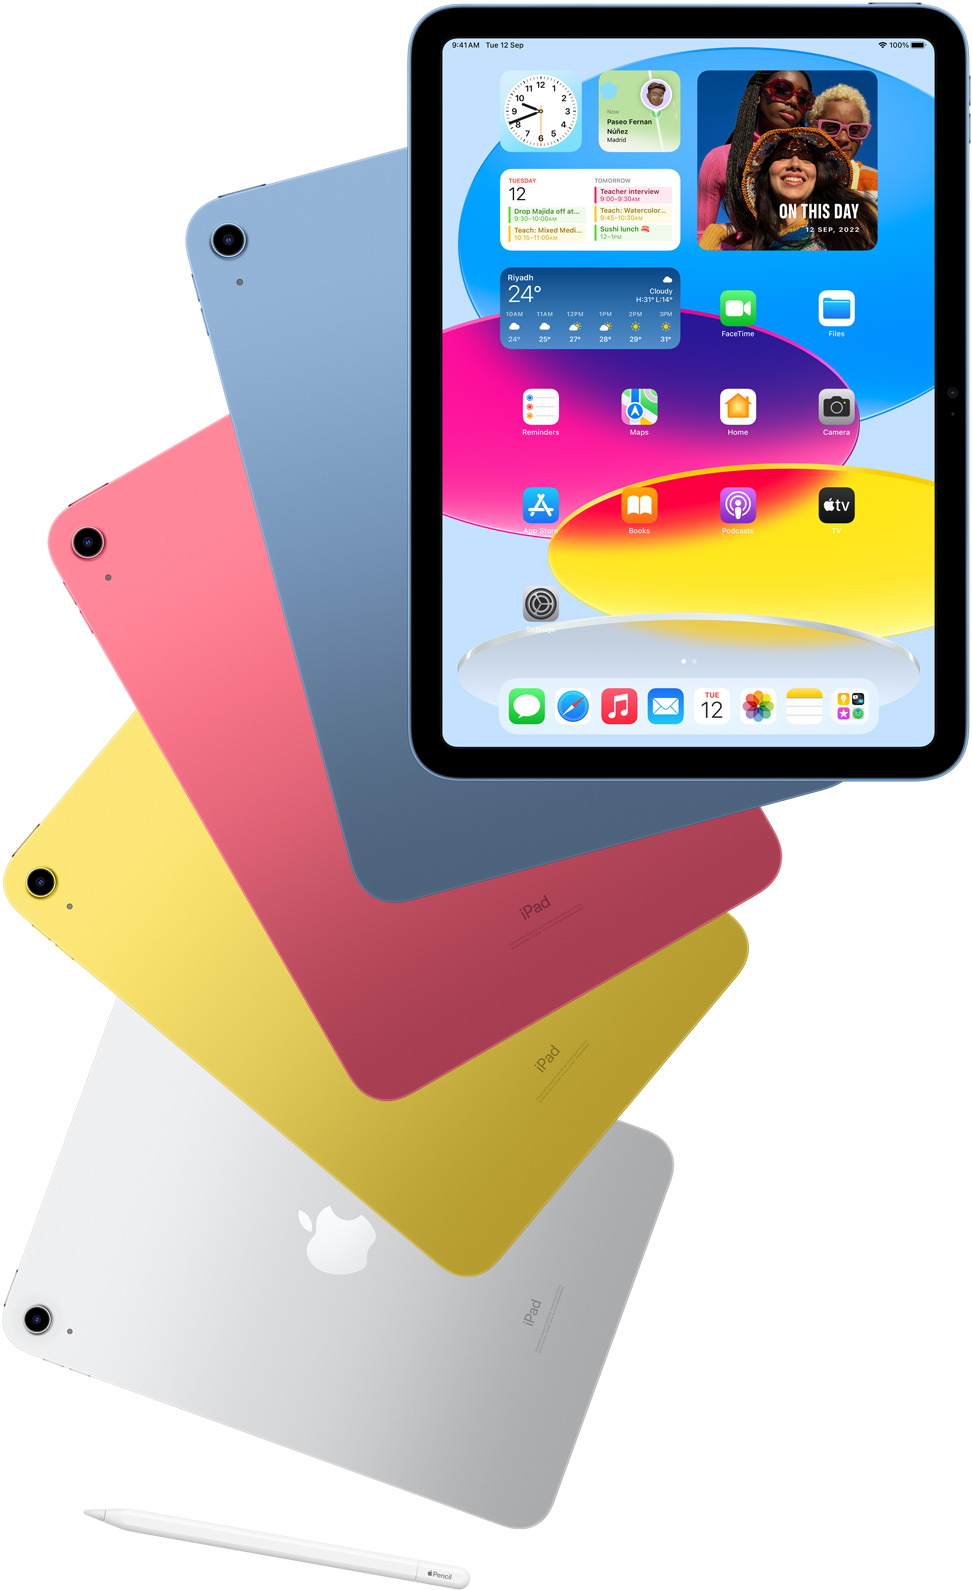 Front view iPad shows the home screen with blue, pink, yellow, and silver rear-facing iPads. An Apple Pencil sits nears the arranged iPad models.